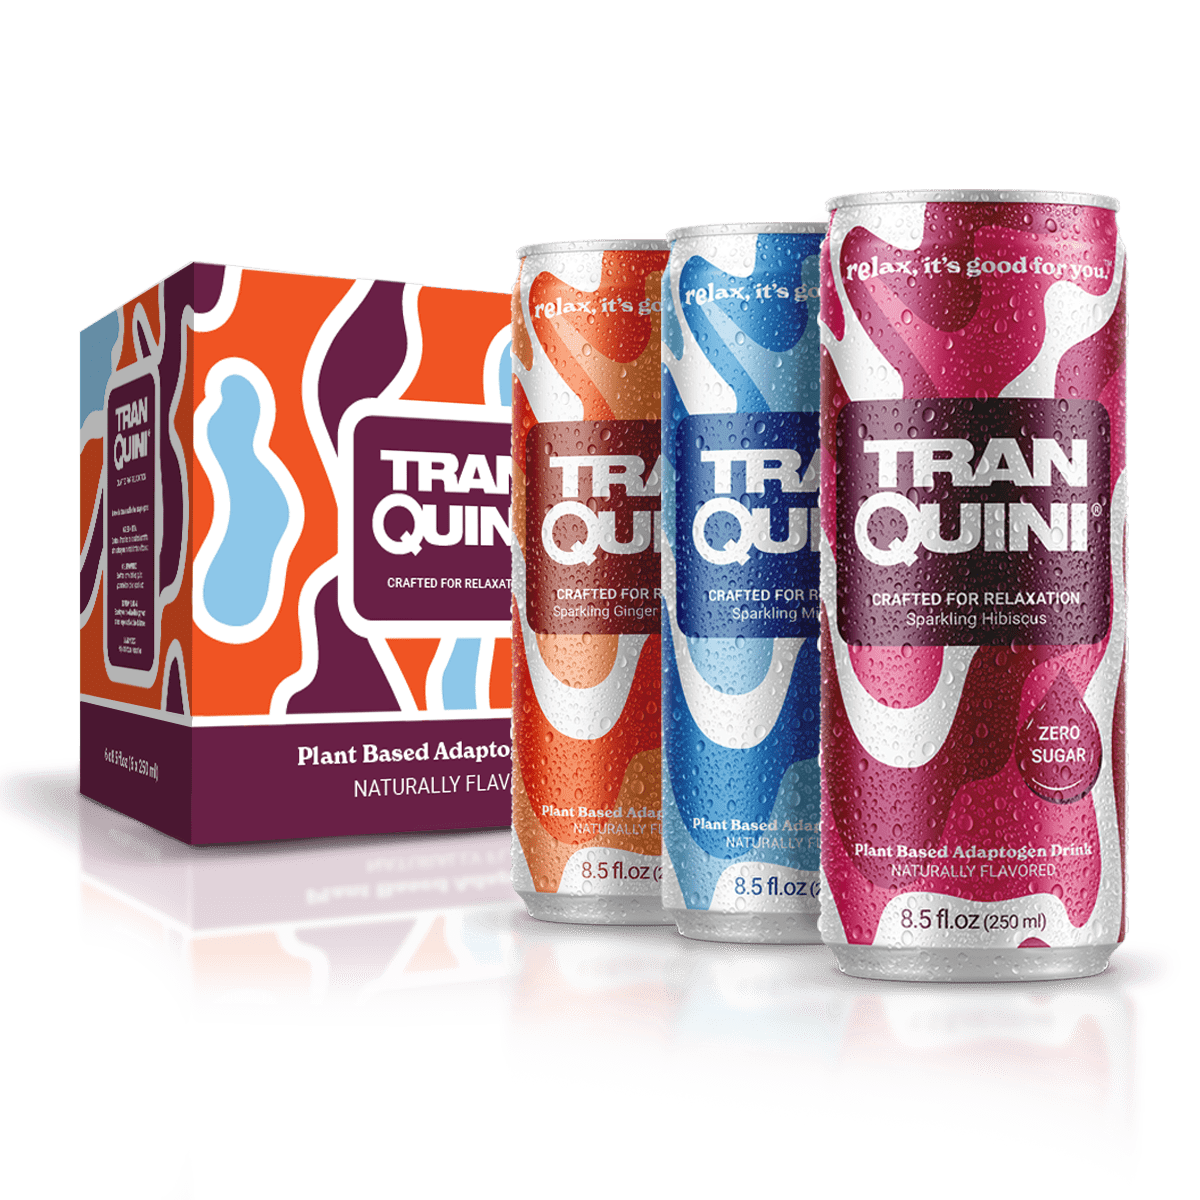 Image of a box of Tranquini beverages alongside three cans. The box is colorful with abstract patterns and reads "Plant Based Adaptogen Drinks, Naturally Flavored.” The cans, in blue, orange, and pink, are labeled as sparkling hibiscus, each containing 8.5 fl. oz and zero sugar. Shop now for ultimate relaxation!